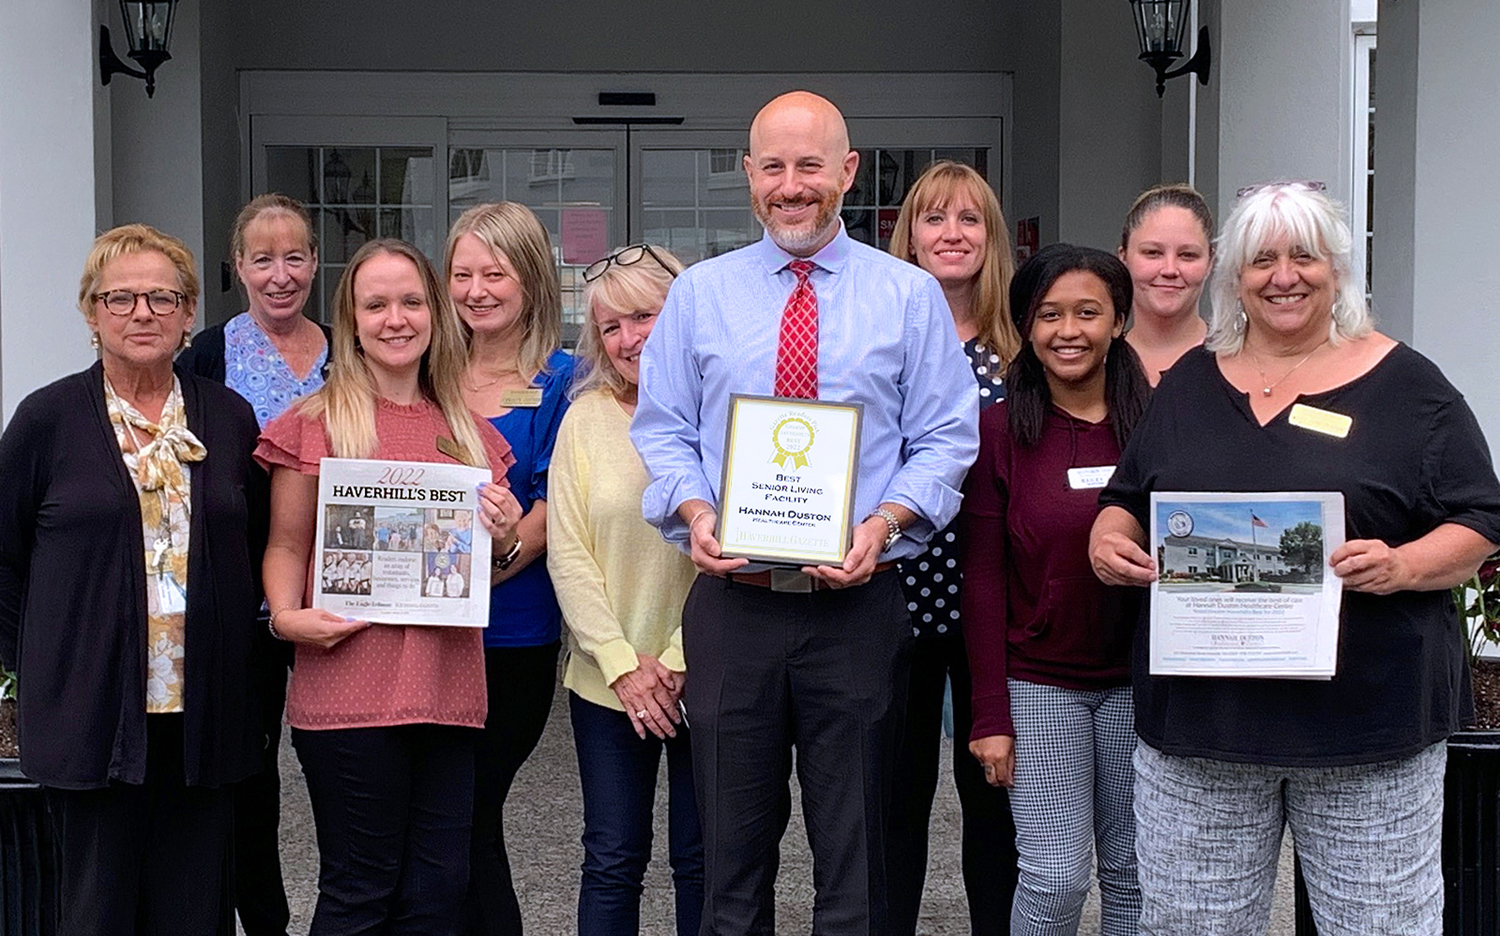 Hannah Duston Healthcare Center was voted the #1 Senior Living facility in the Greater Haverhill area by readers of the Eagle Tribune and the Haverhill Gazette!